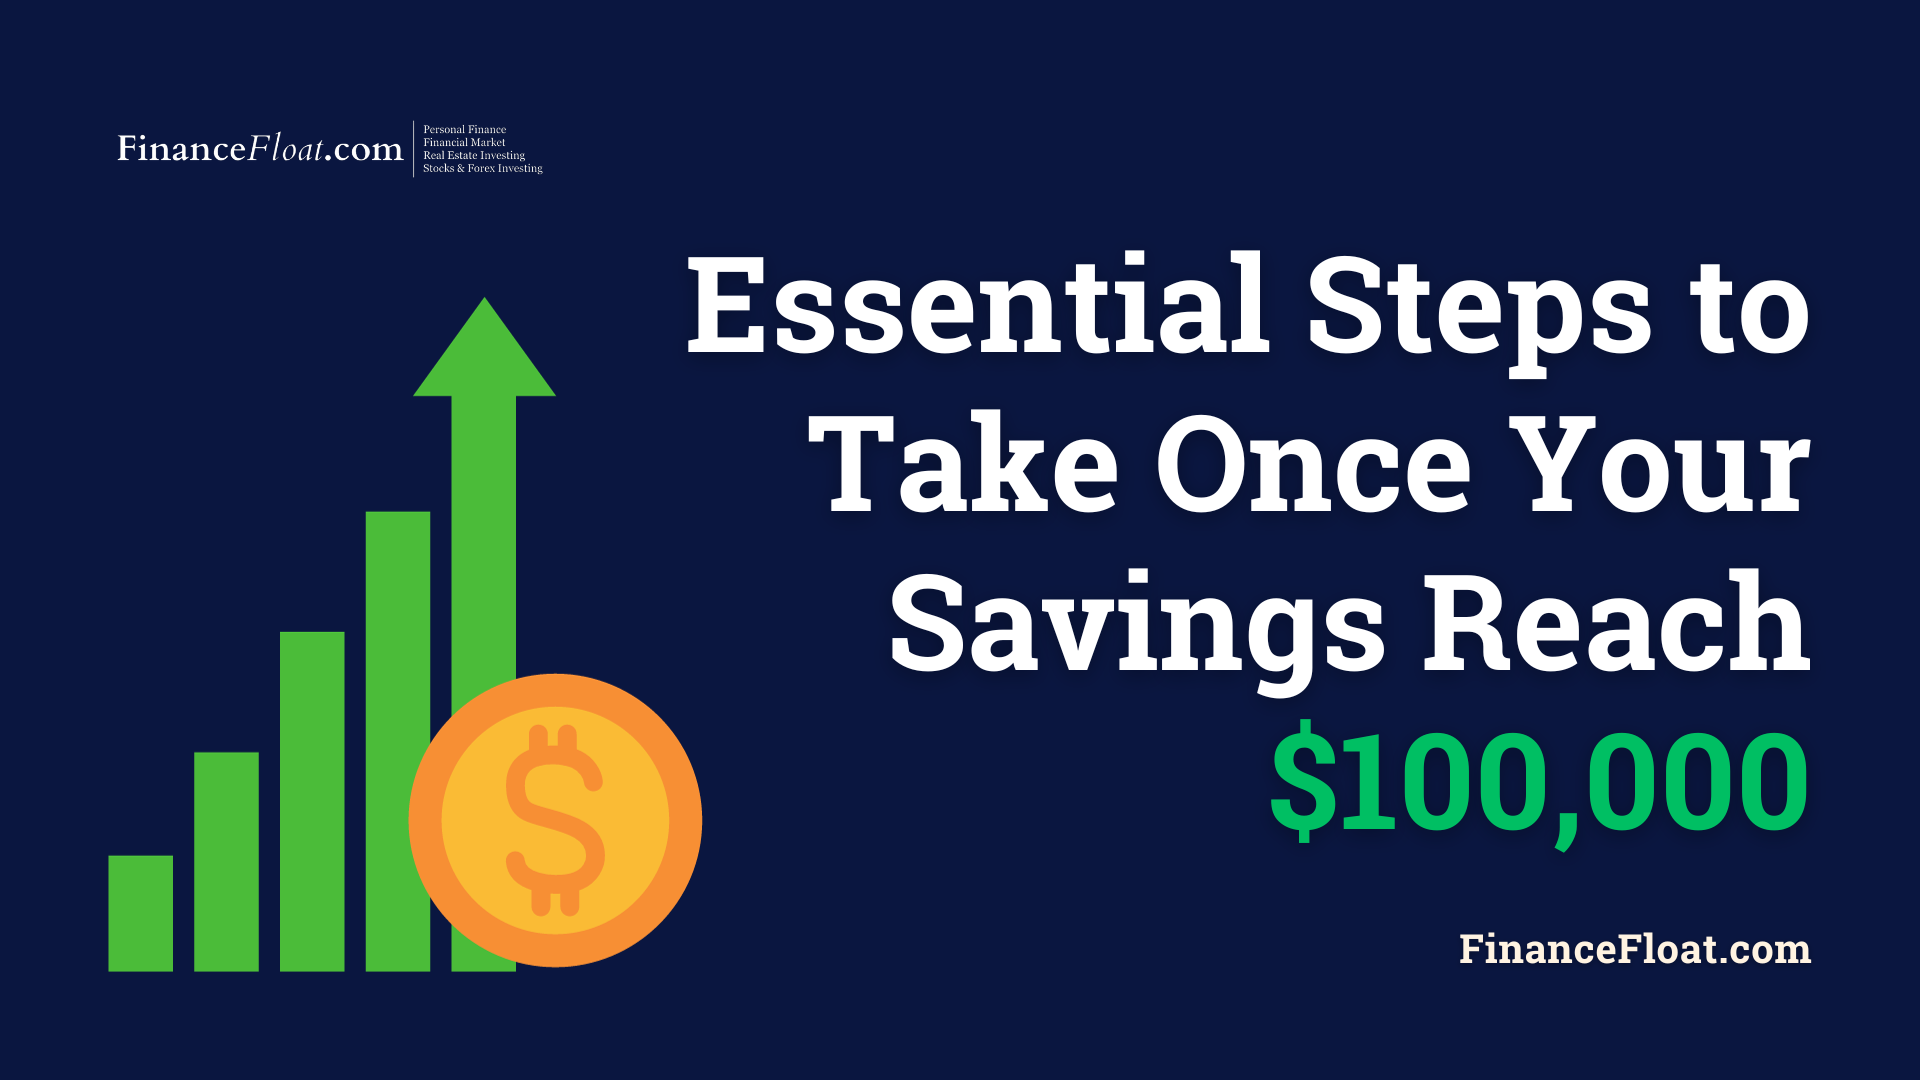 Essential Steps to Take Once Your Savings Reach $100,000